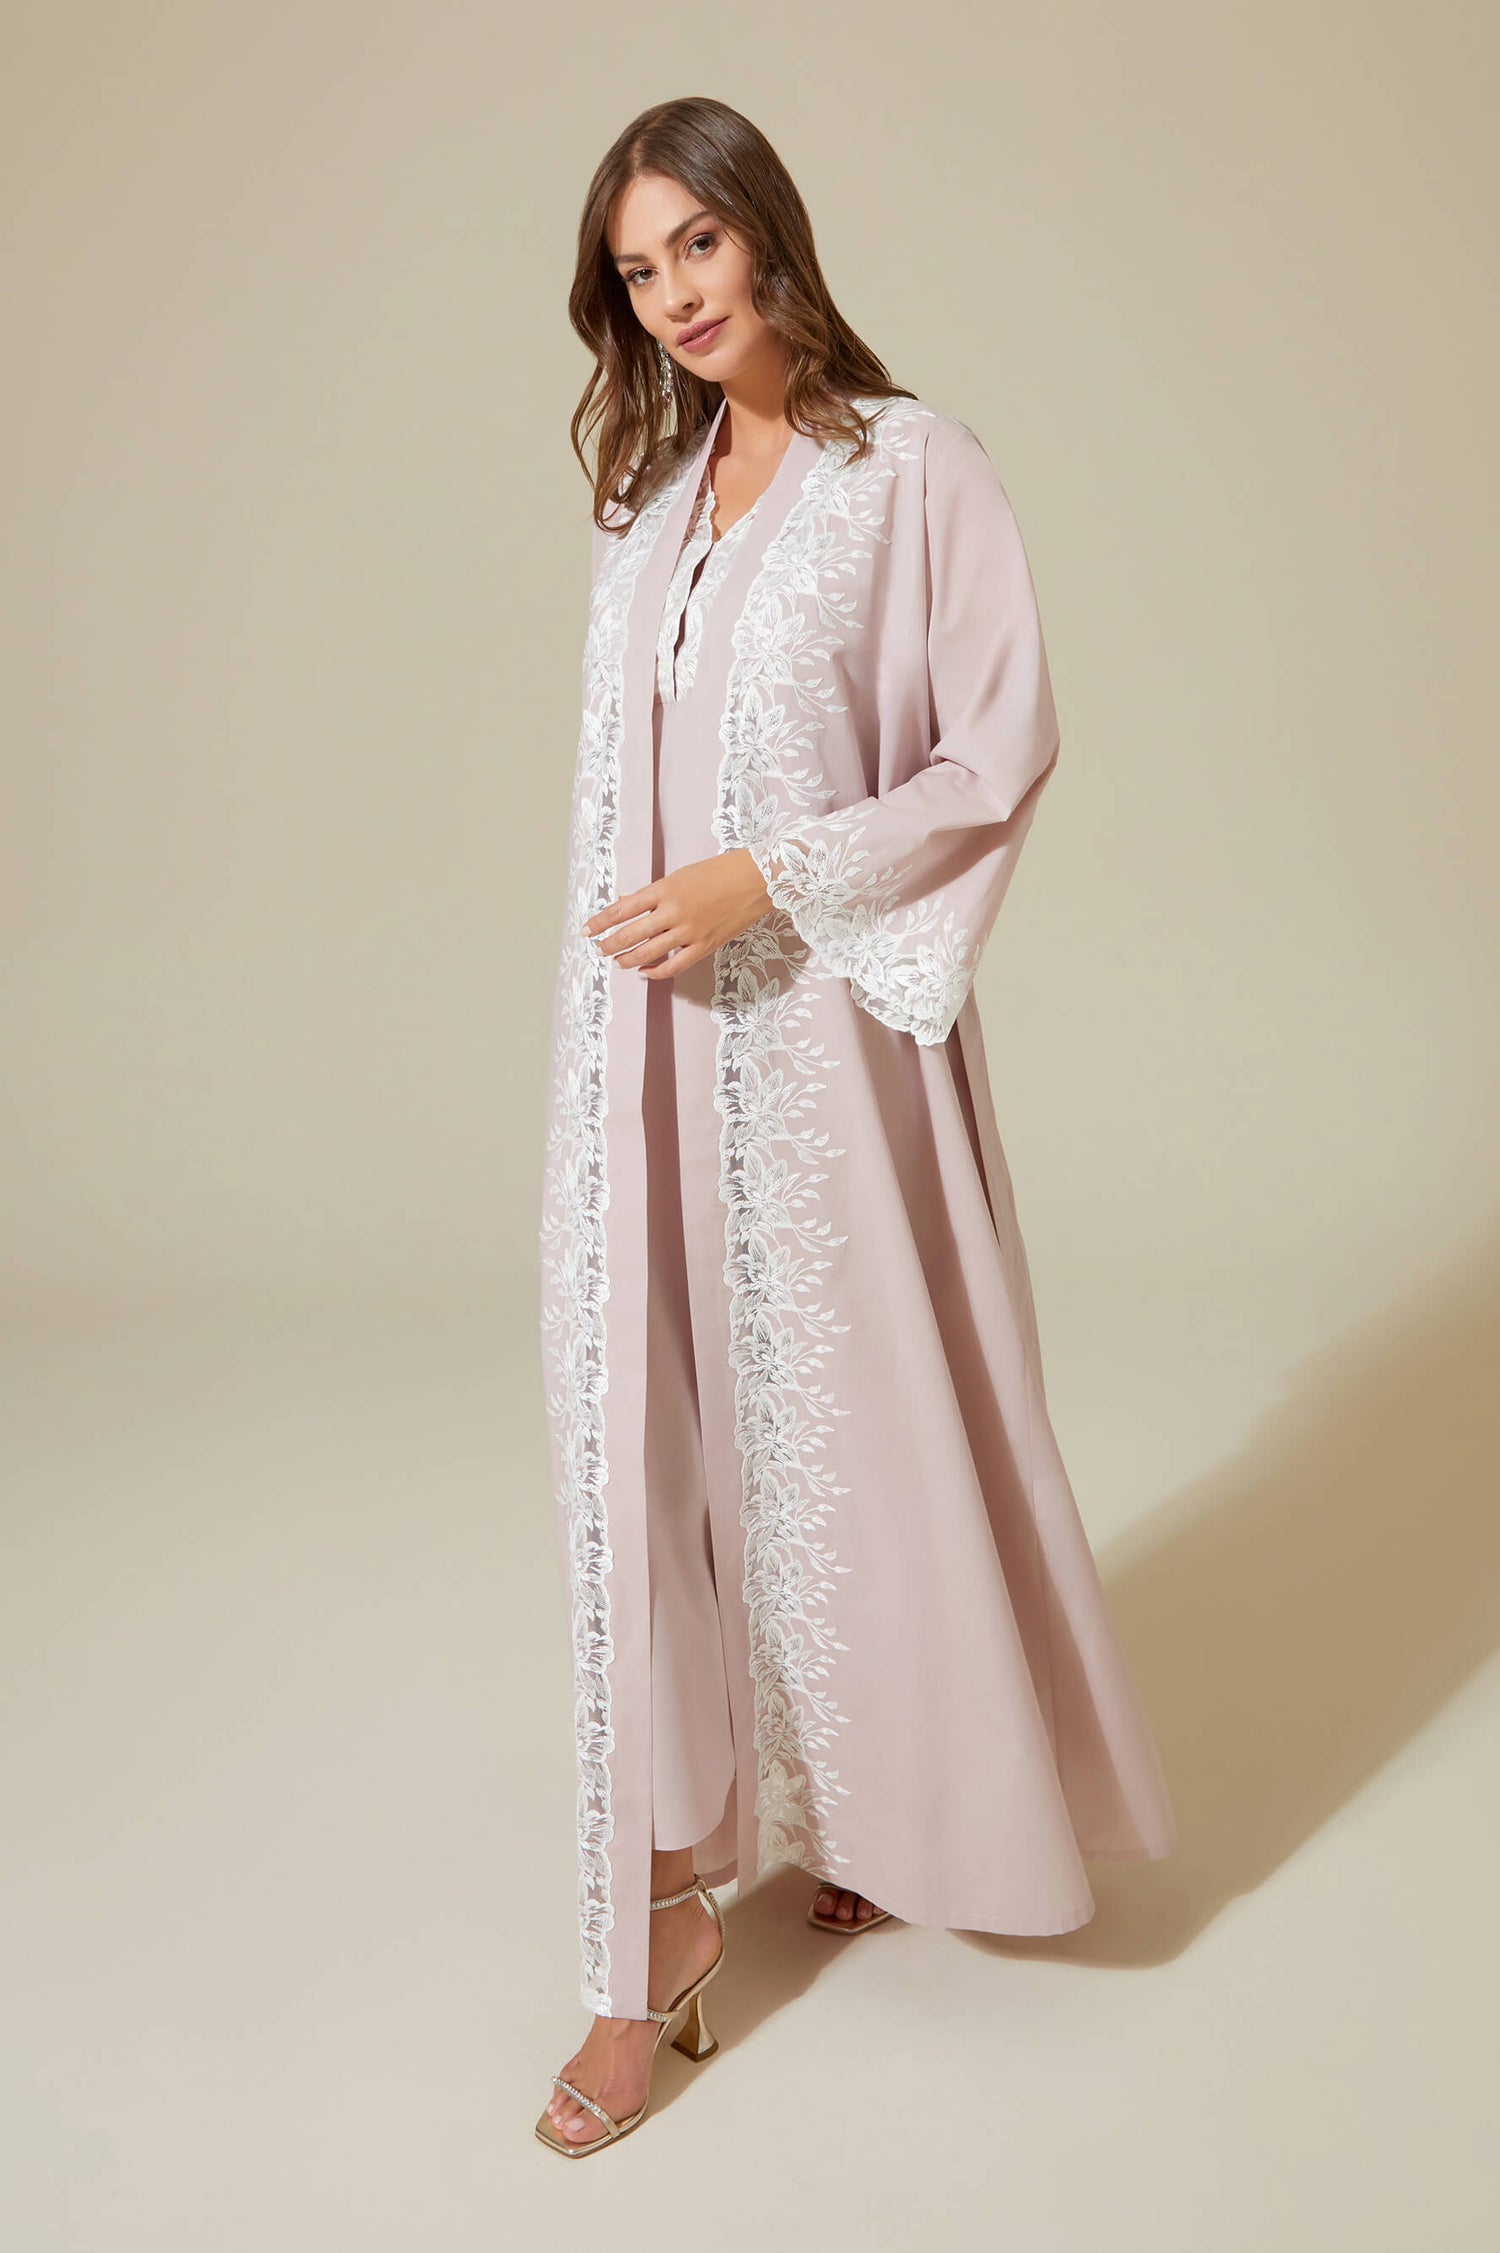 Maia - Trimmed Cotton Voile Long Sleeve Robe Set - Powder